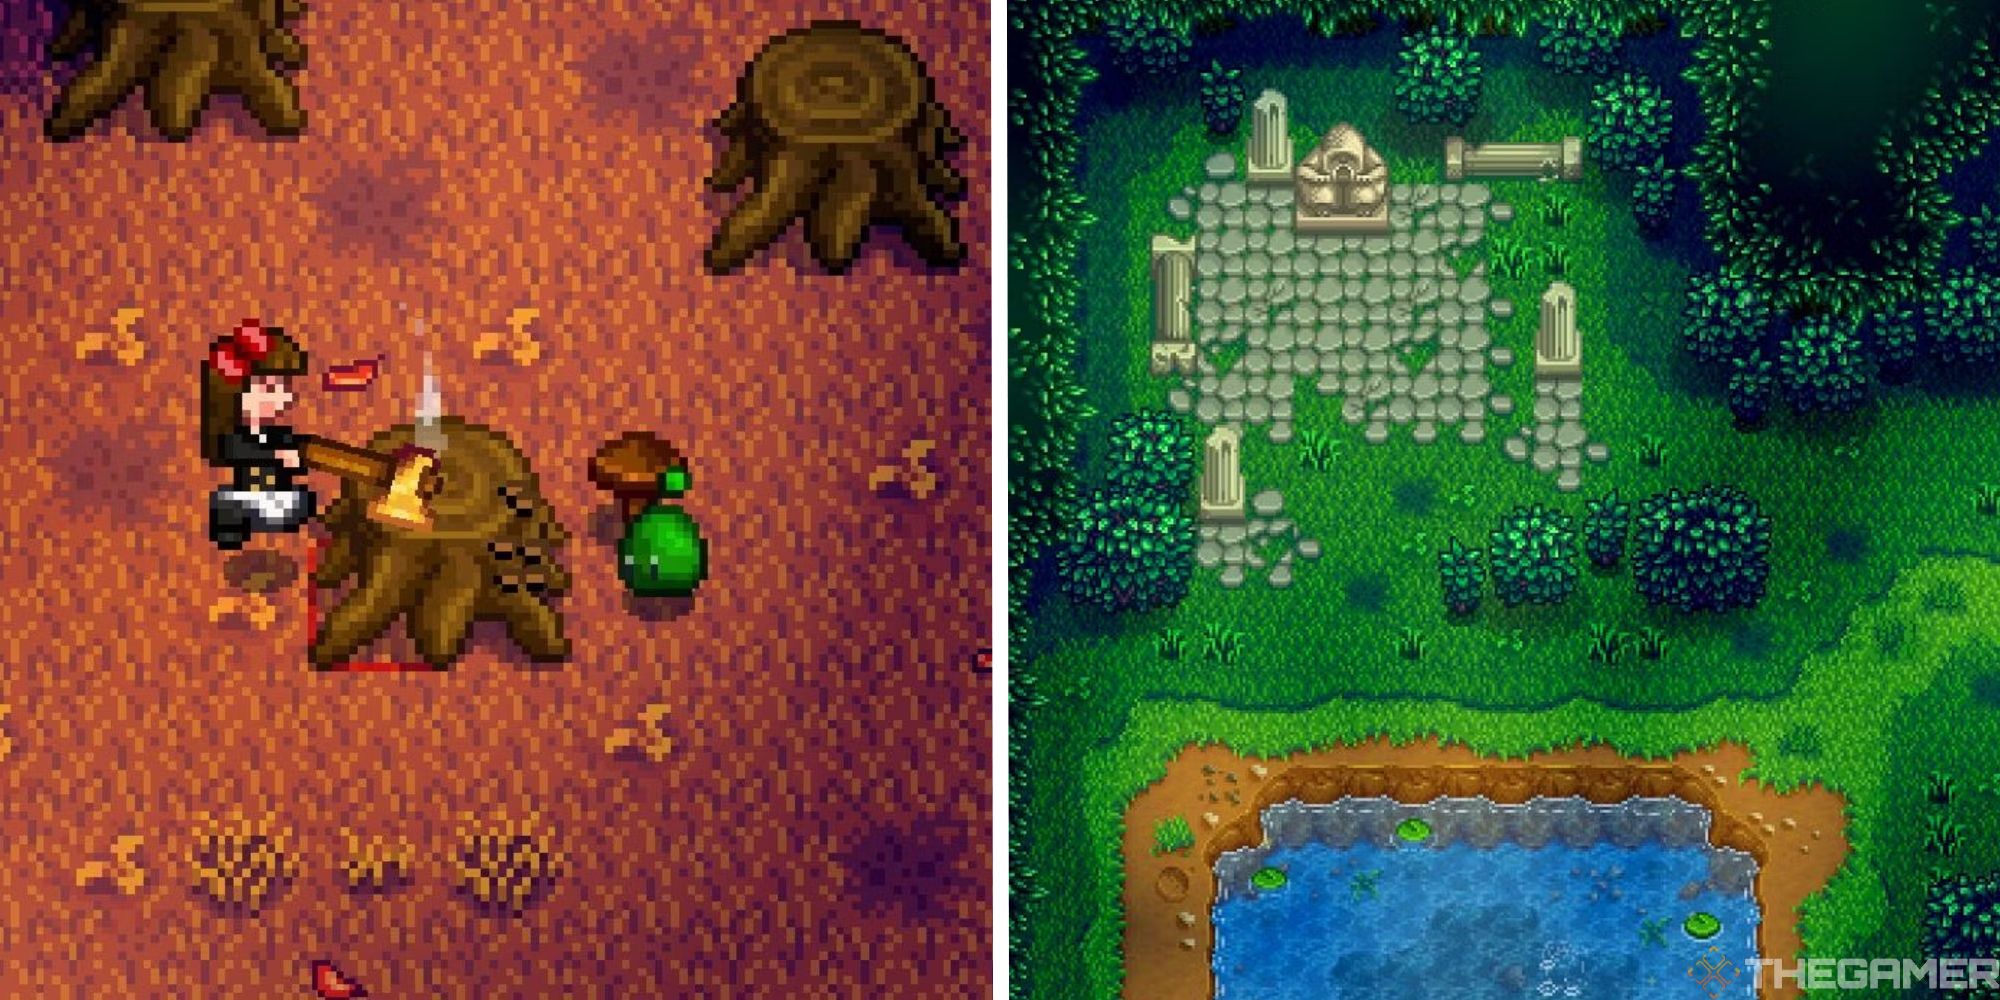 stardew valley secret woods split image showing player chop a stump next to image of zoomed out view of secret woods